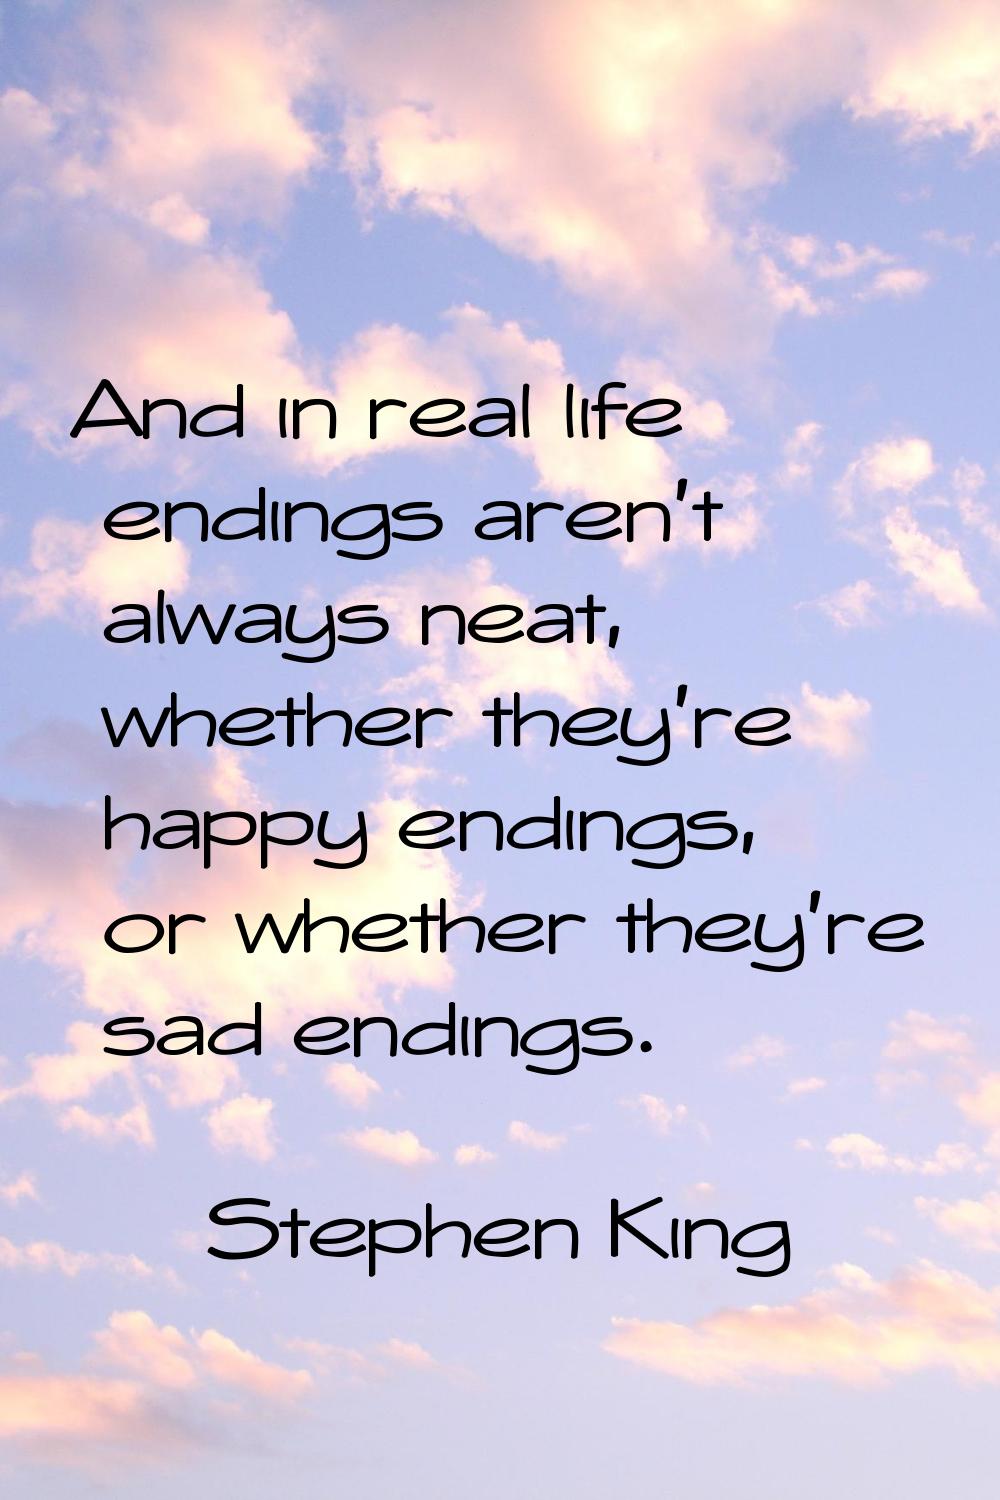 And in real life endings aren't always neat, whether they're happy endings, or whether they're sad 